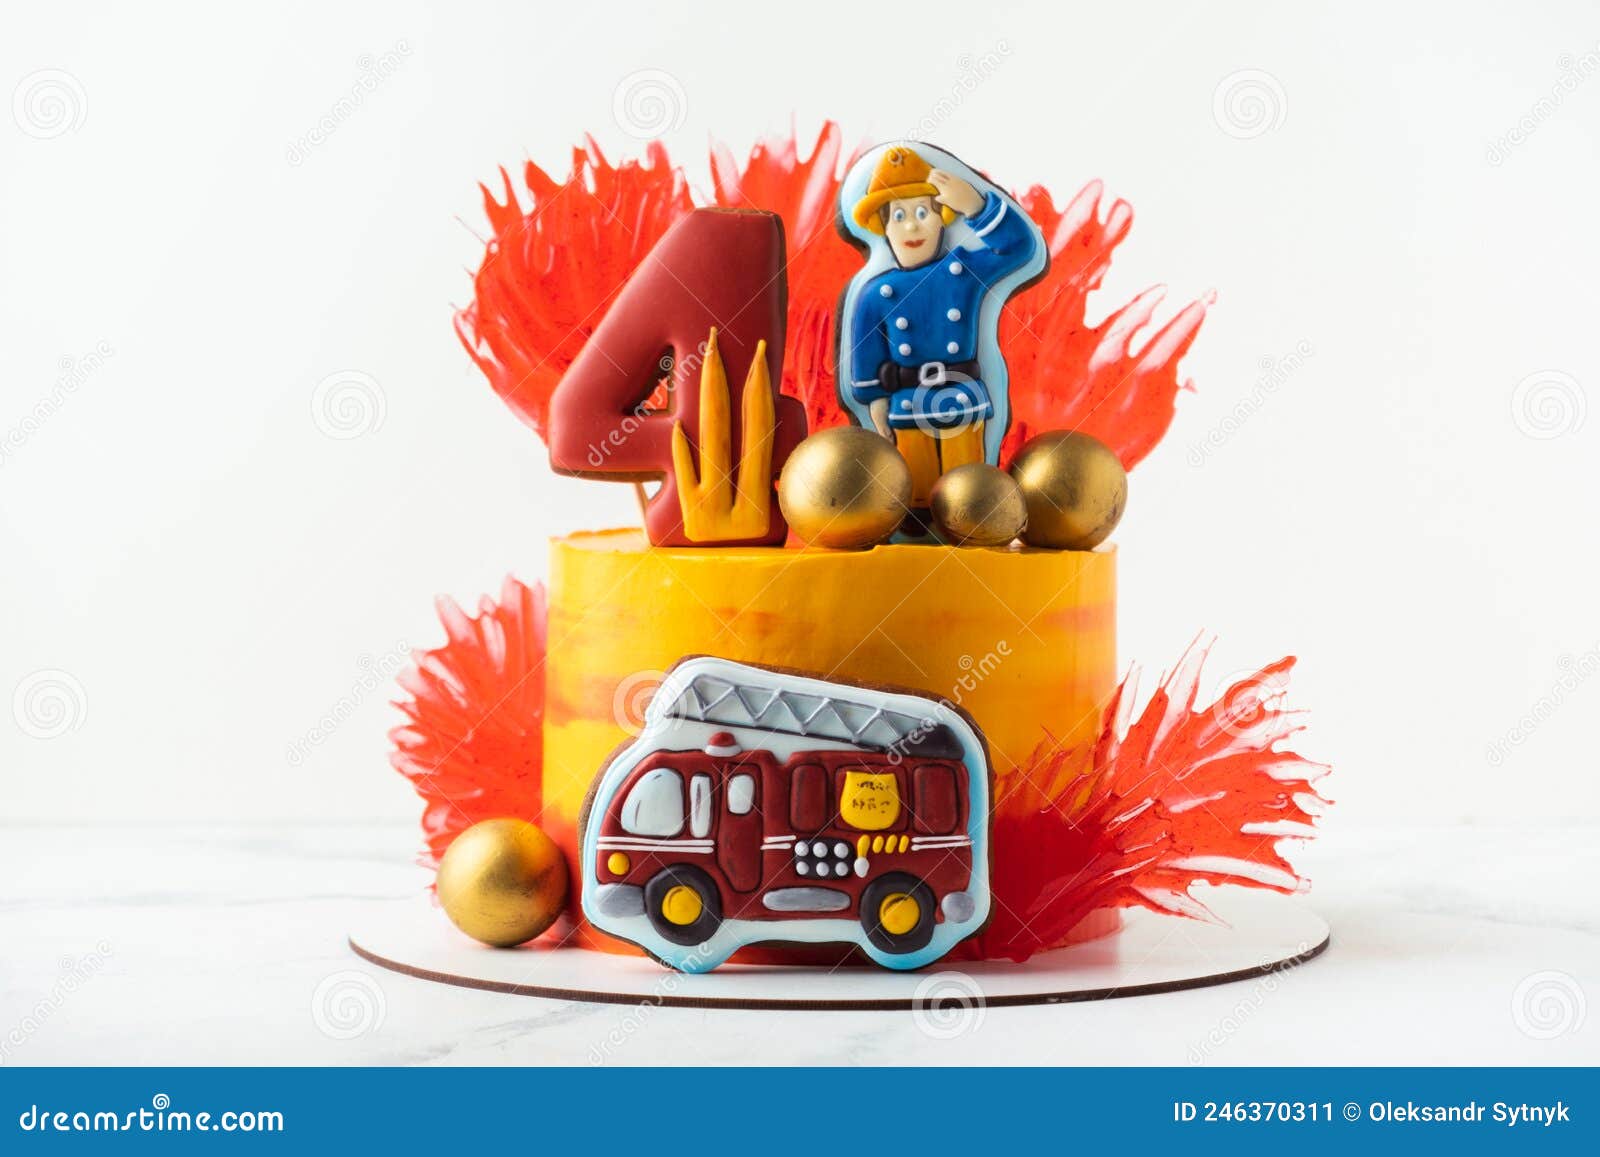 Firefighters cakes  HERE Discover the most popular ideas 